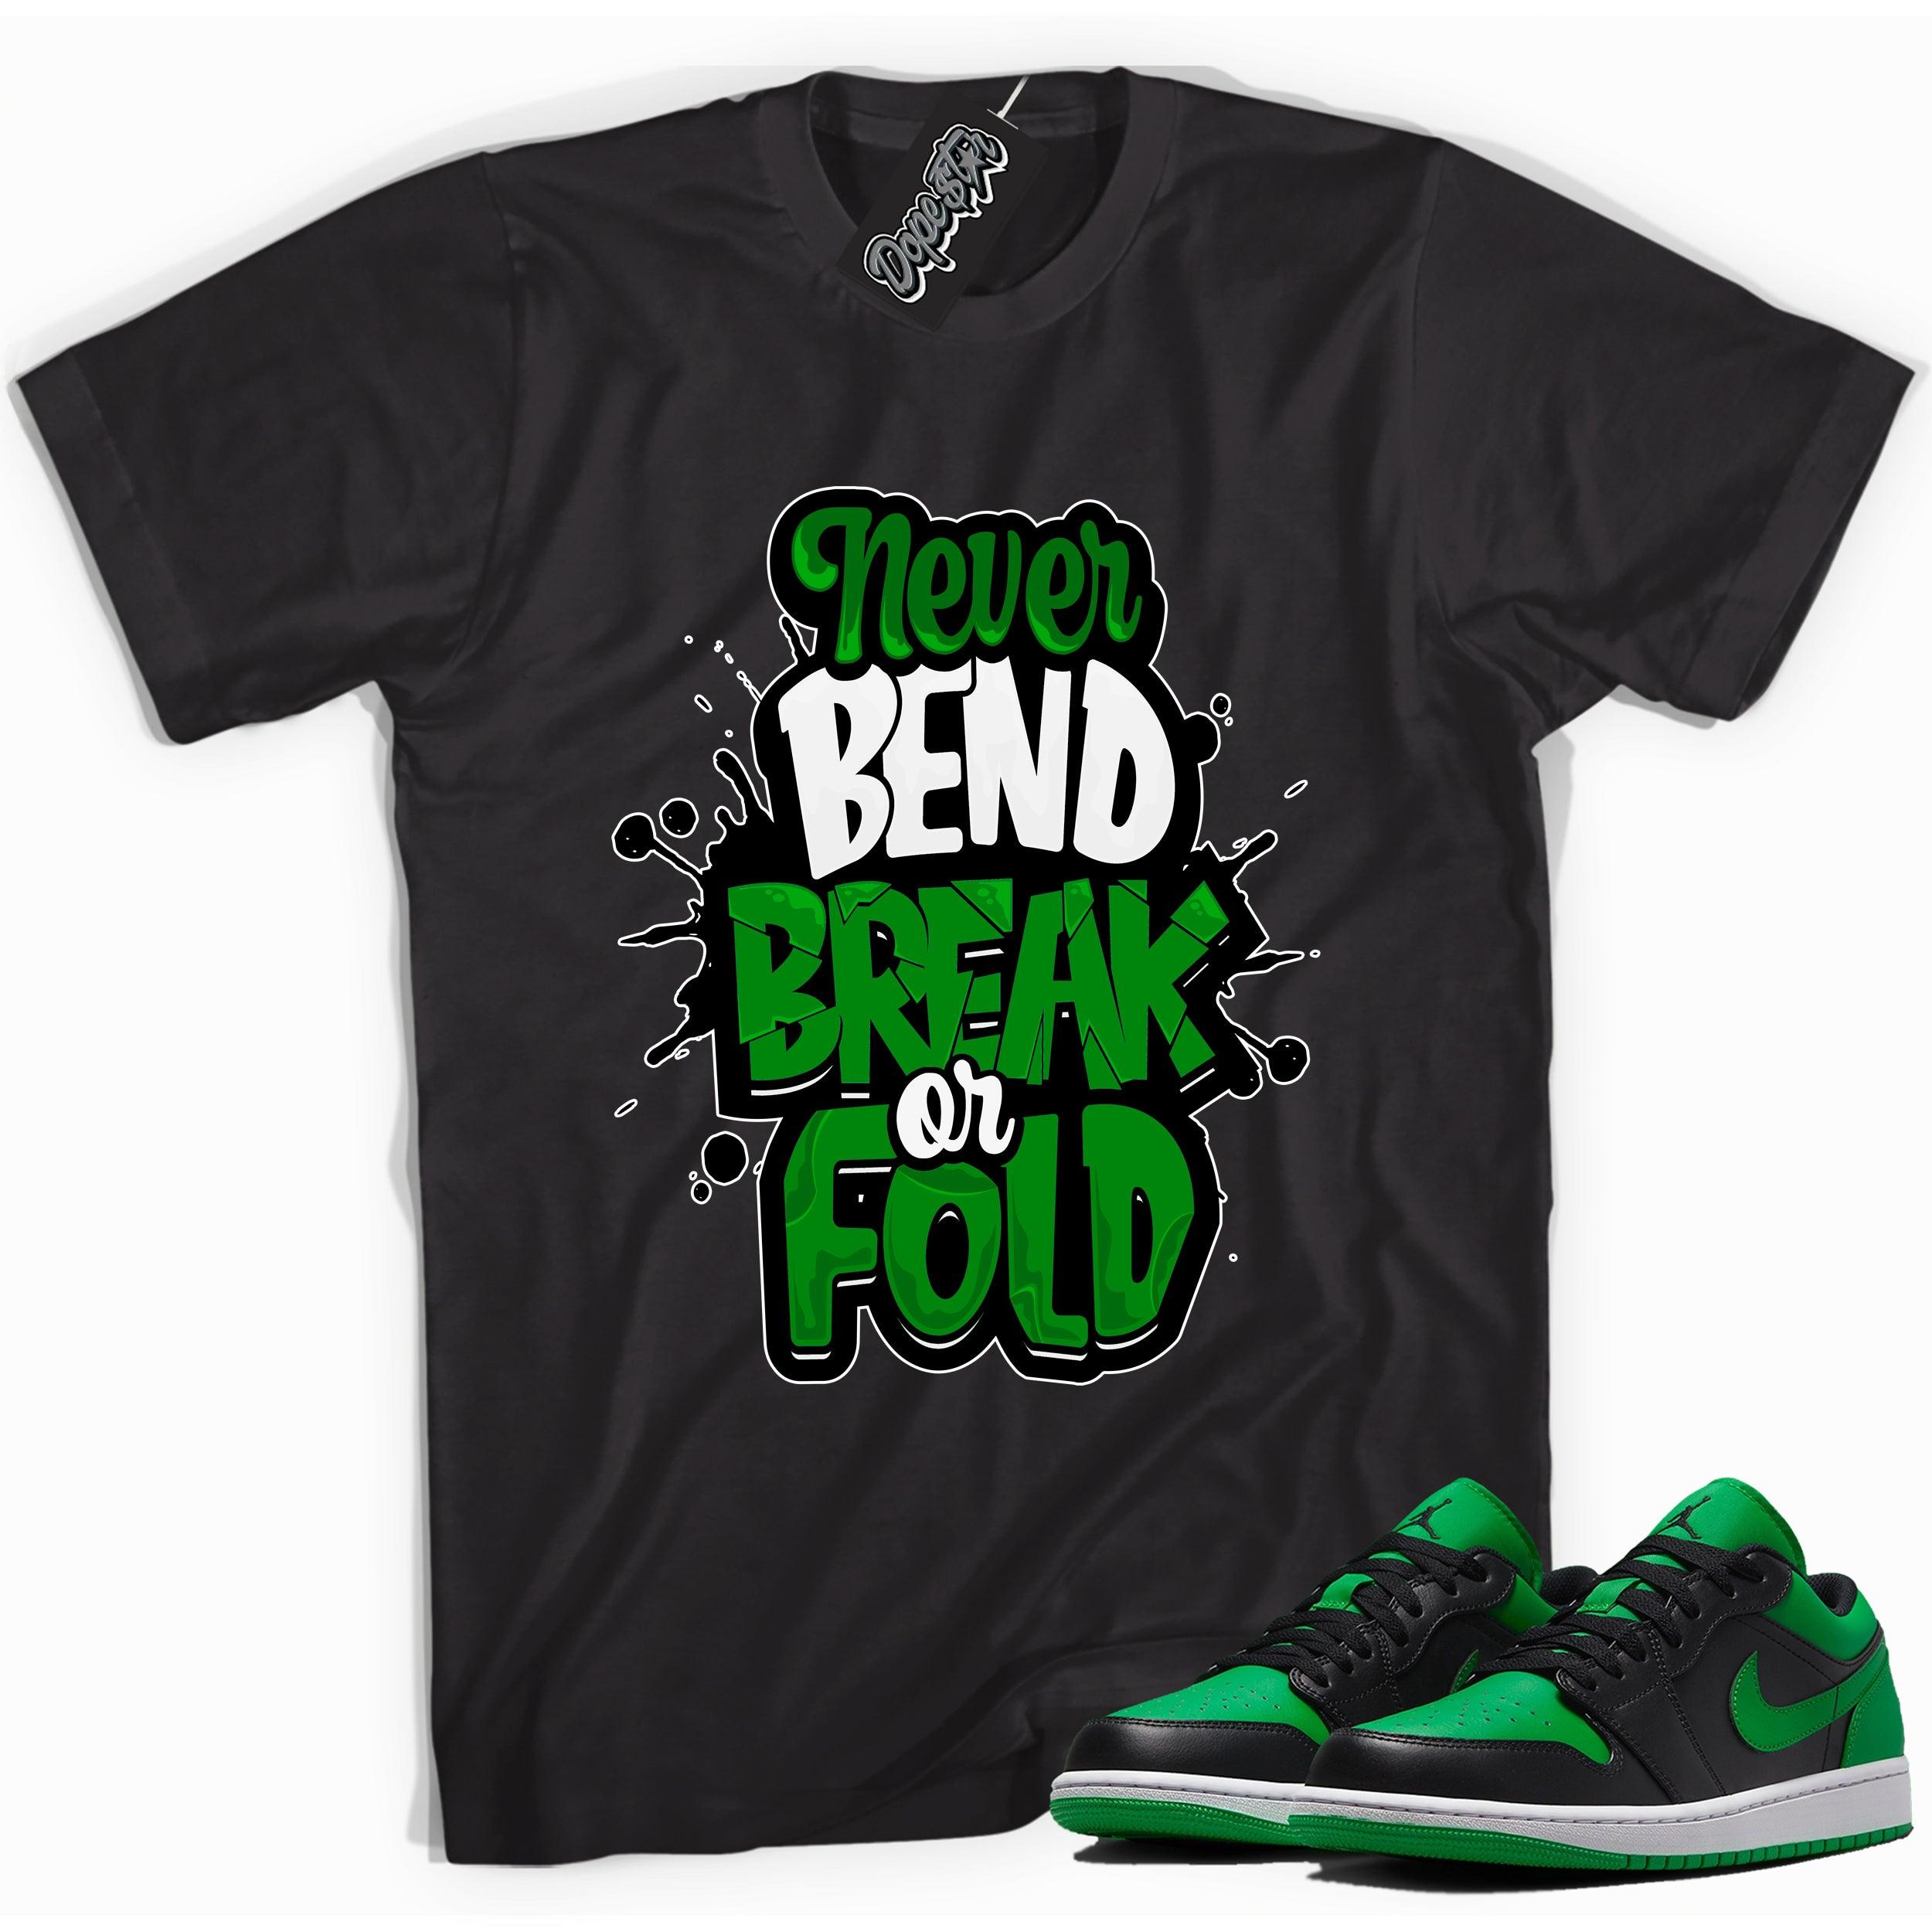 Cool black graphic tee with 'never bend break or fold' print, that perfectly matches Air Jordan 1 Low Lucky Green sneakers